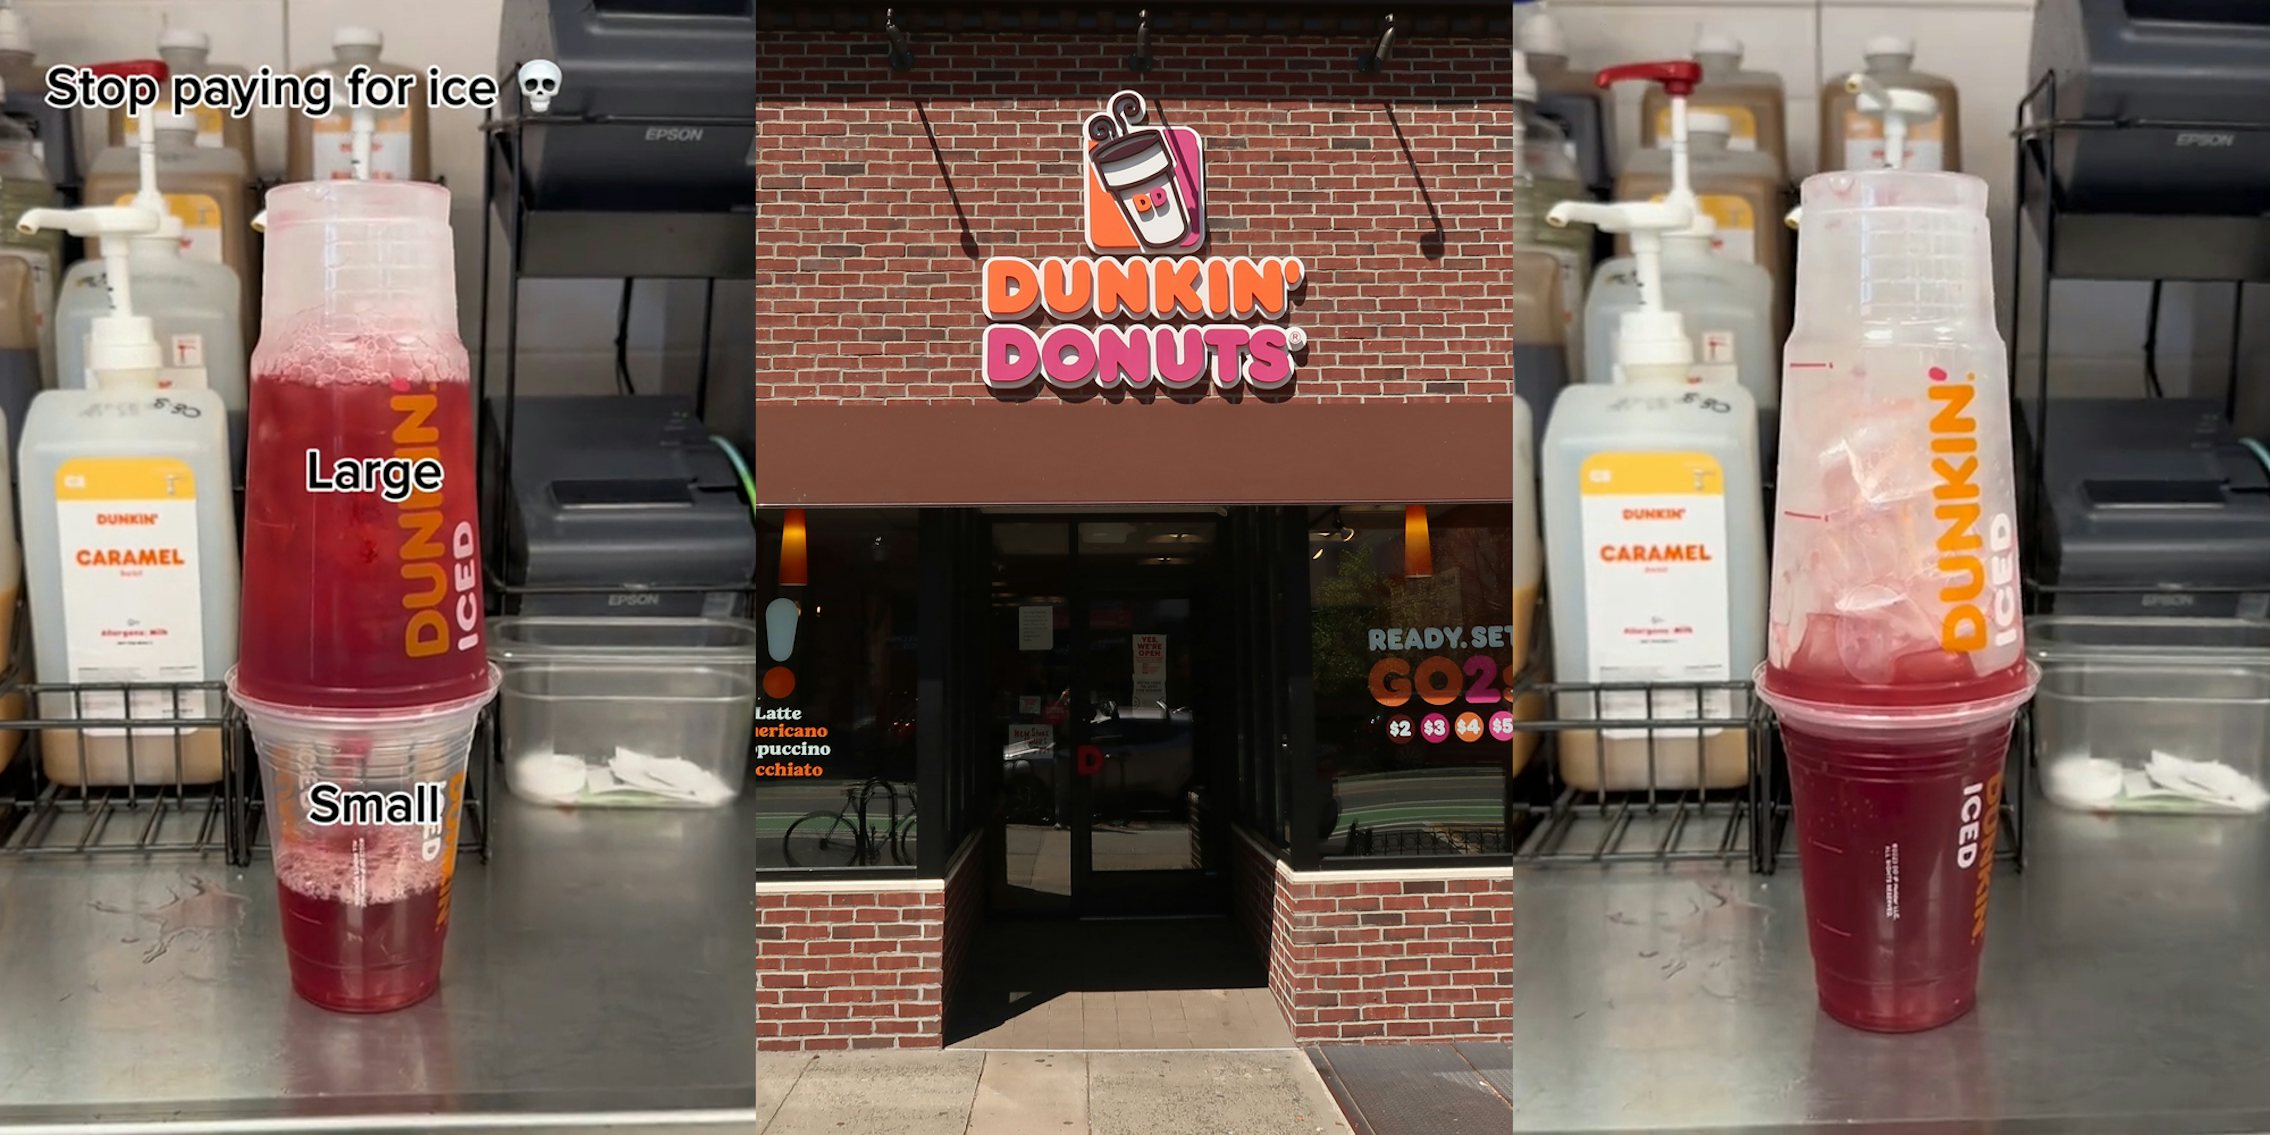 Dunkin' large drink on top of Dunkin' small drink with caption 'Stop paying for ice Large Small' (l) Dunkin building entrance with sign (c) Dunkin' large drink on top of Dunkin' small drink (r)